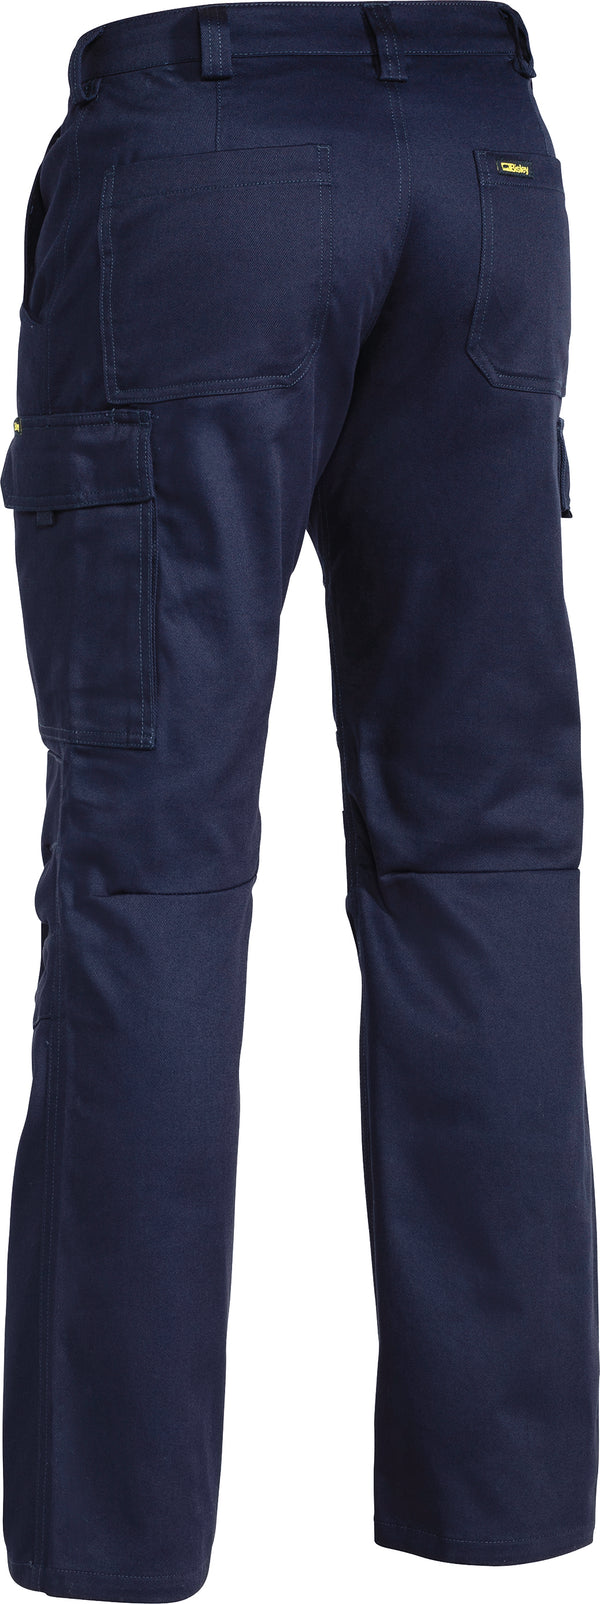 Industrial Engineered Cargo Pants (Stout)